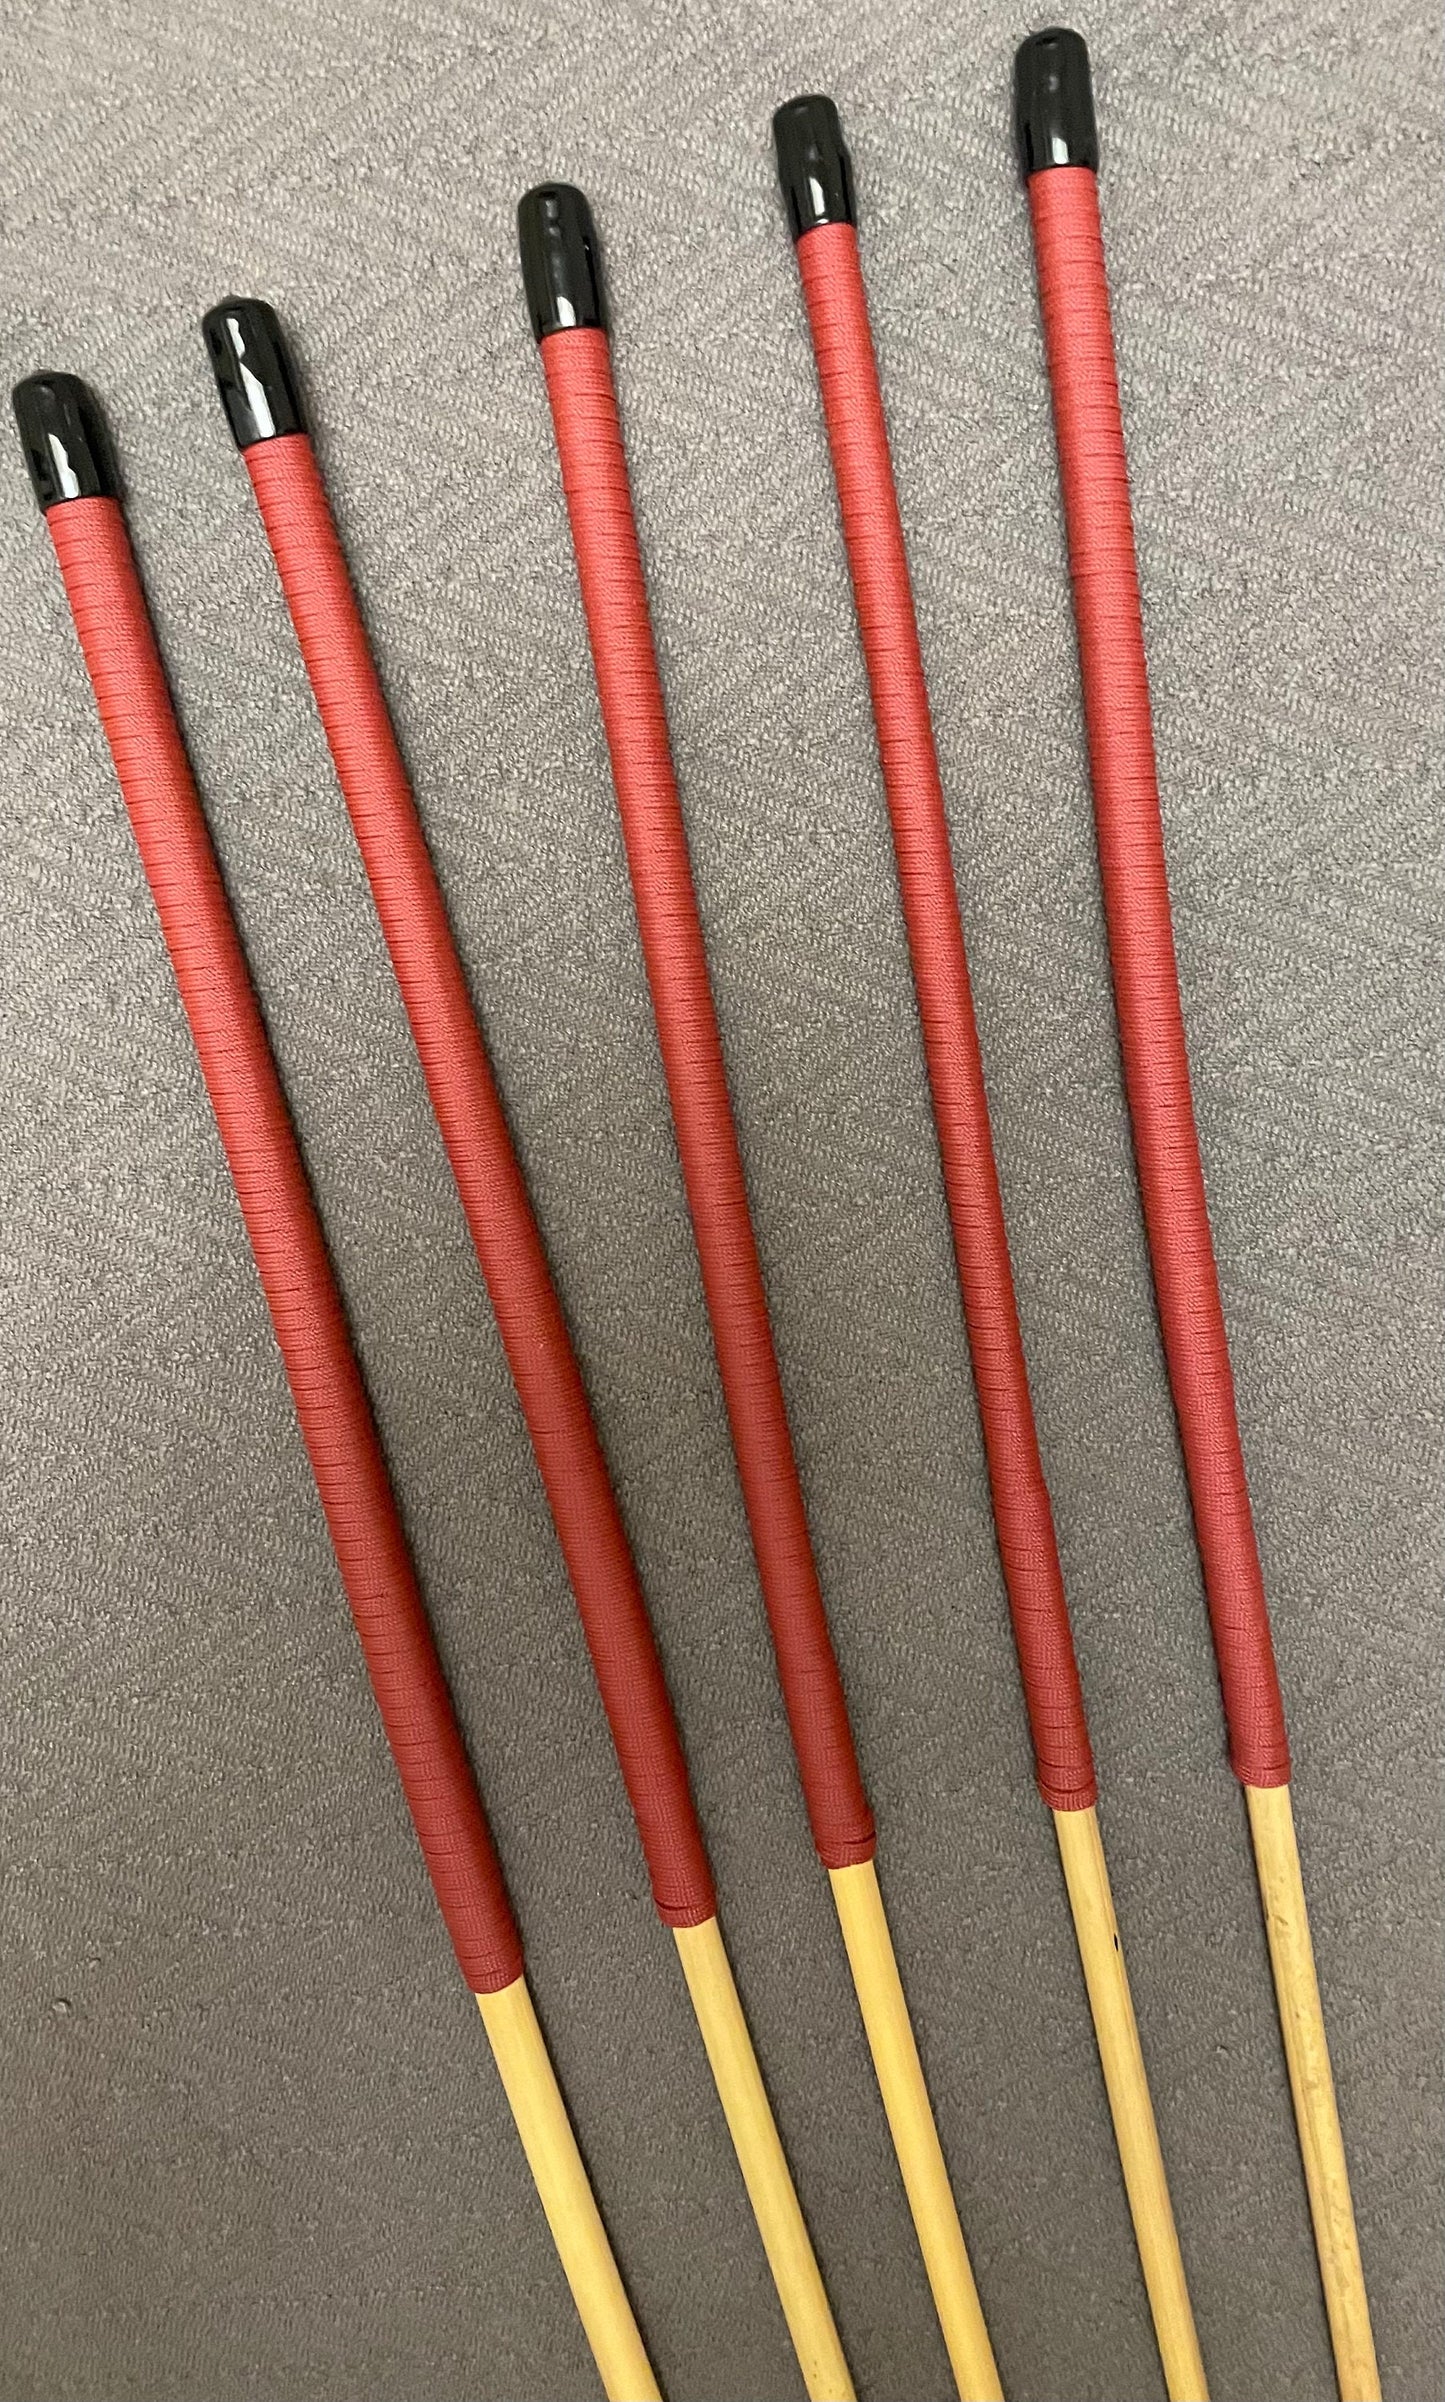 Set of 5 Knotless Dragon Canes / No Knot Rattan Canes / School Canes with Red Paracord Handles - 91 cms Length